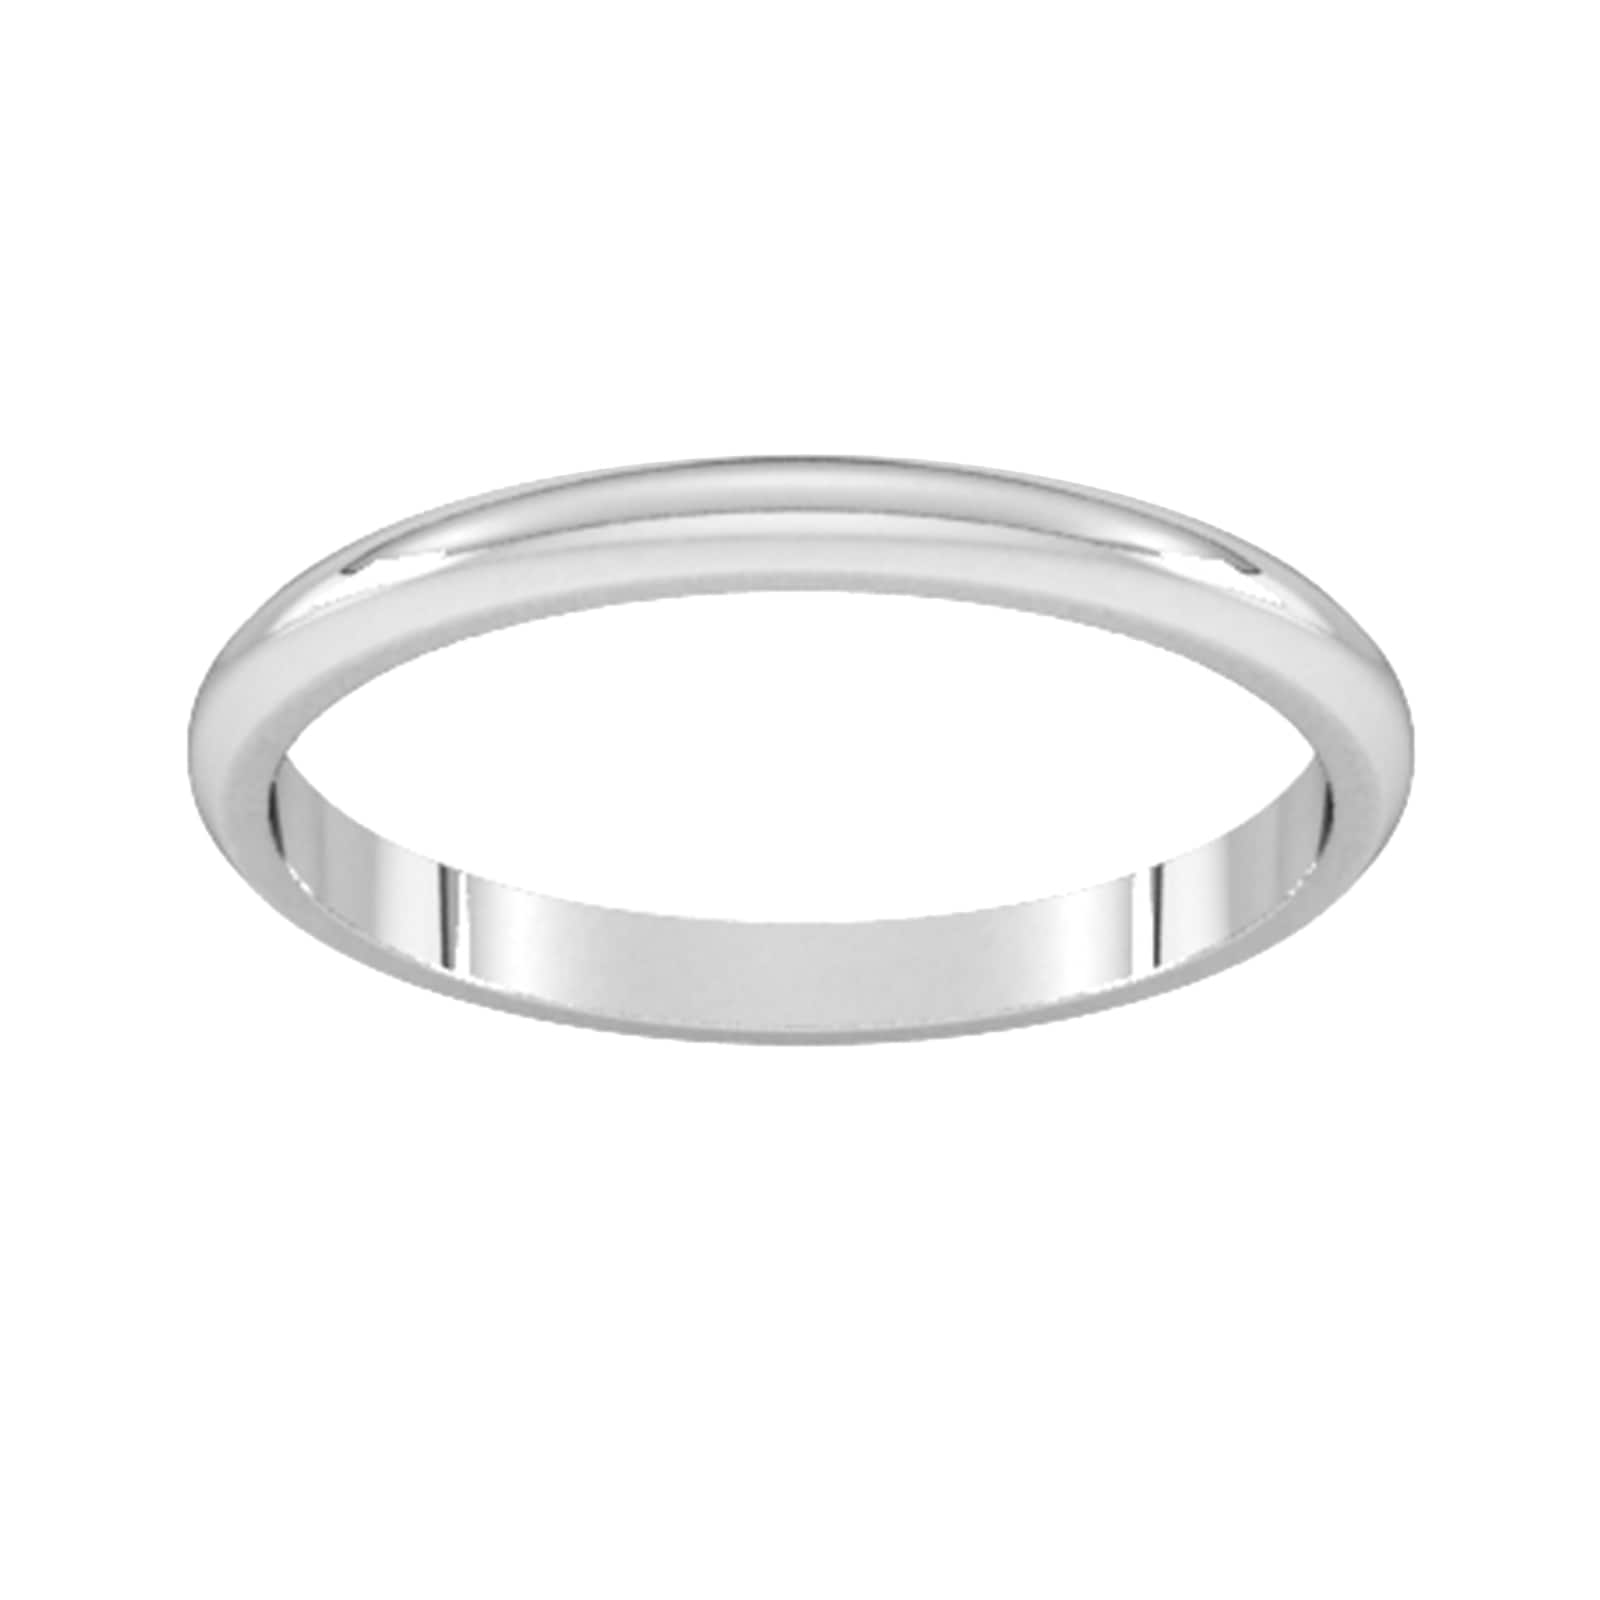 2mm D Shape Standard Wedding Ring In 9 Carat White Gold - Ring Size W